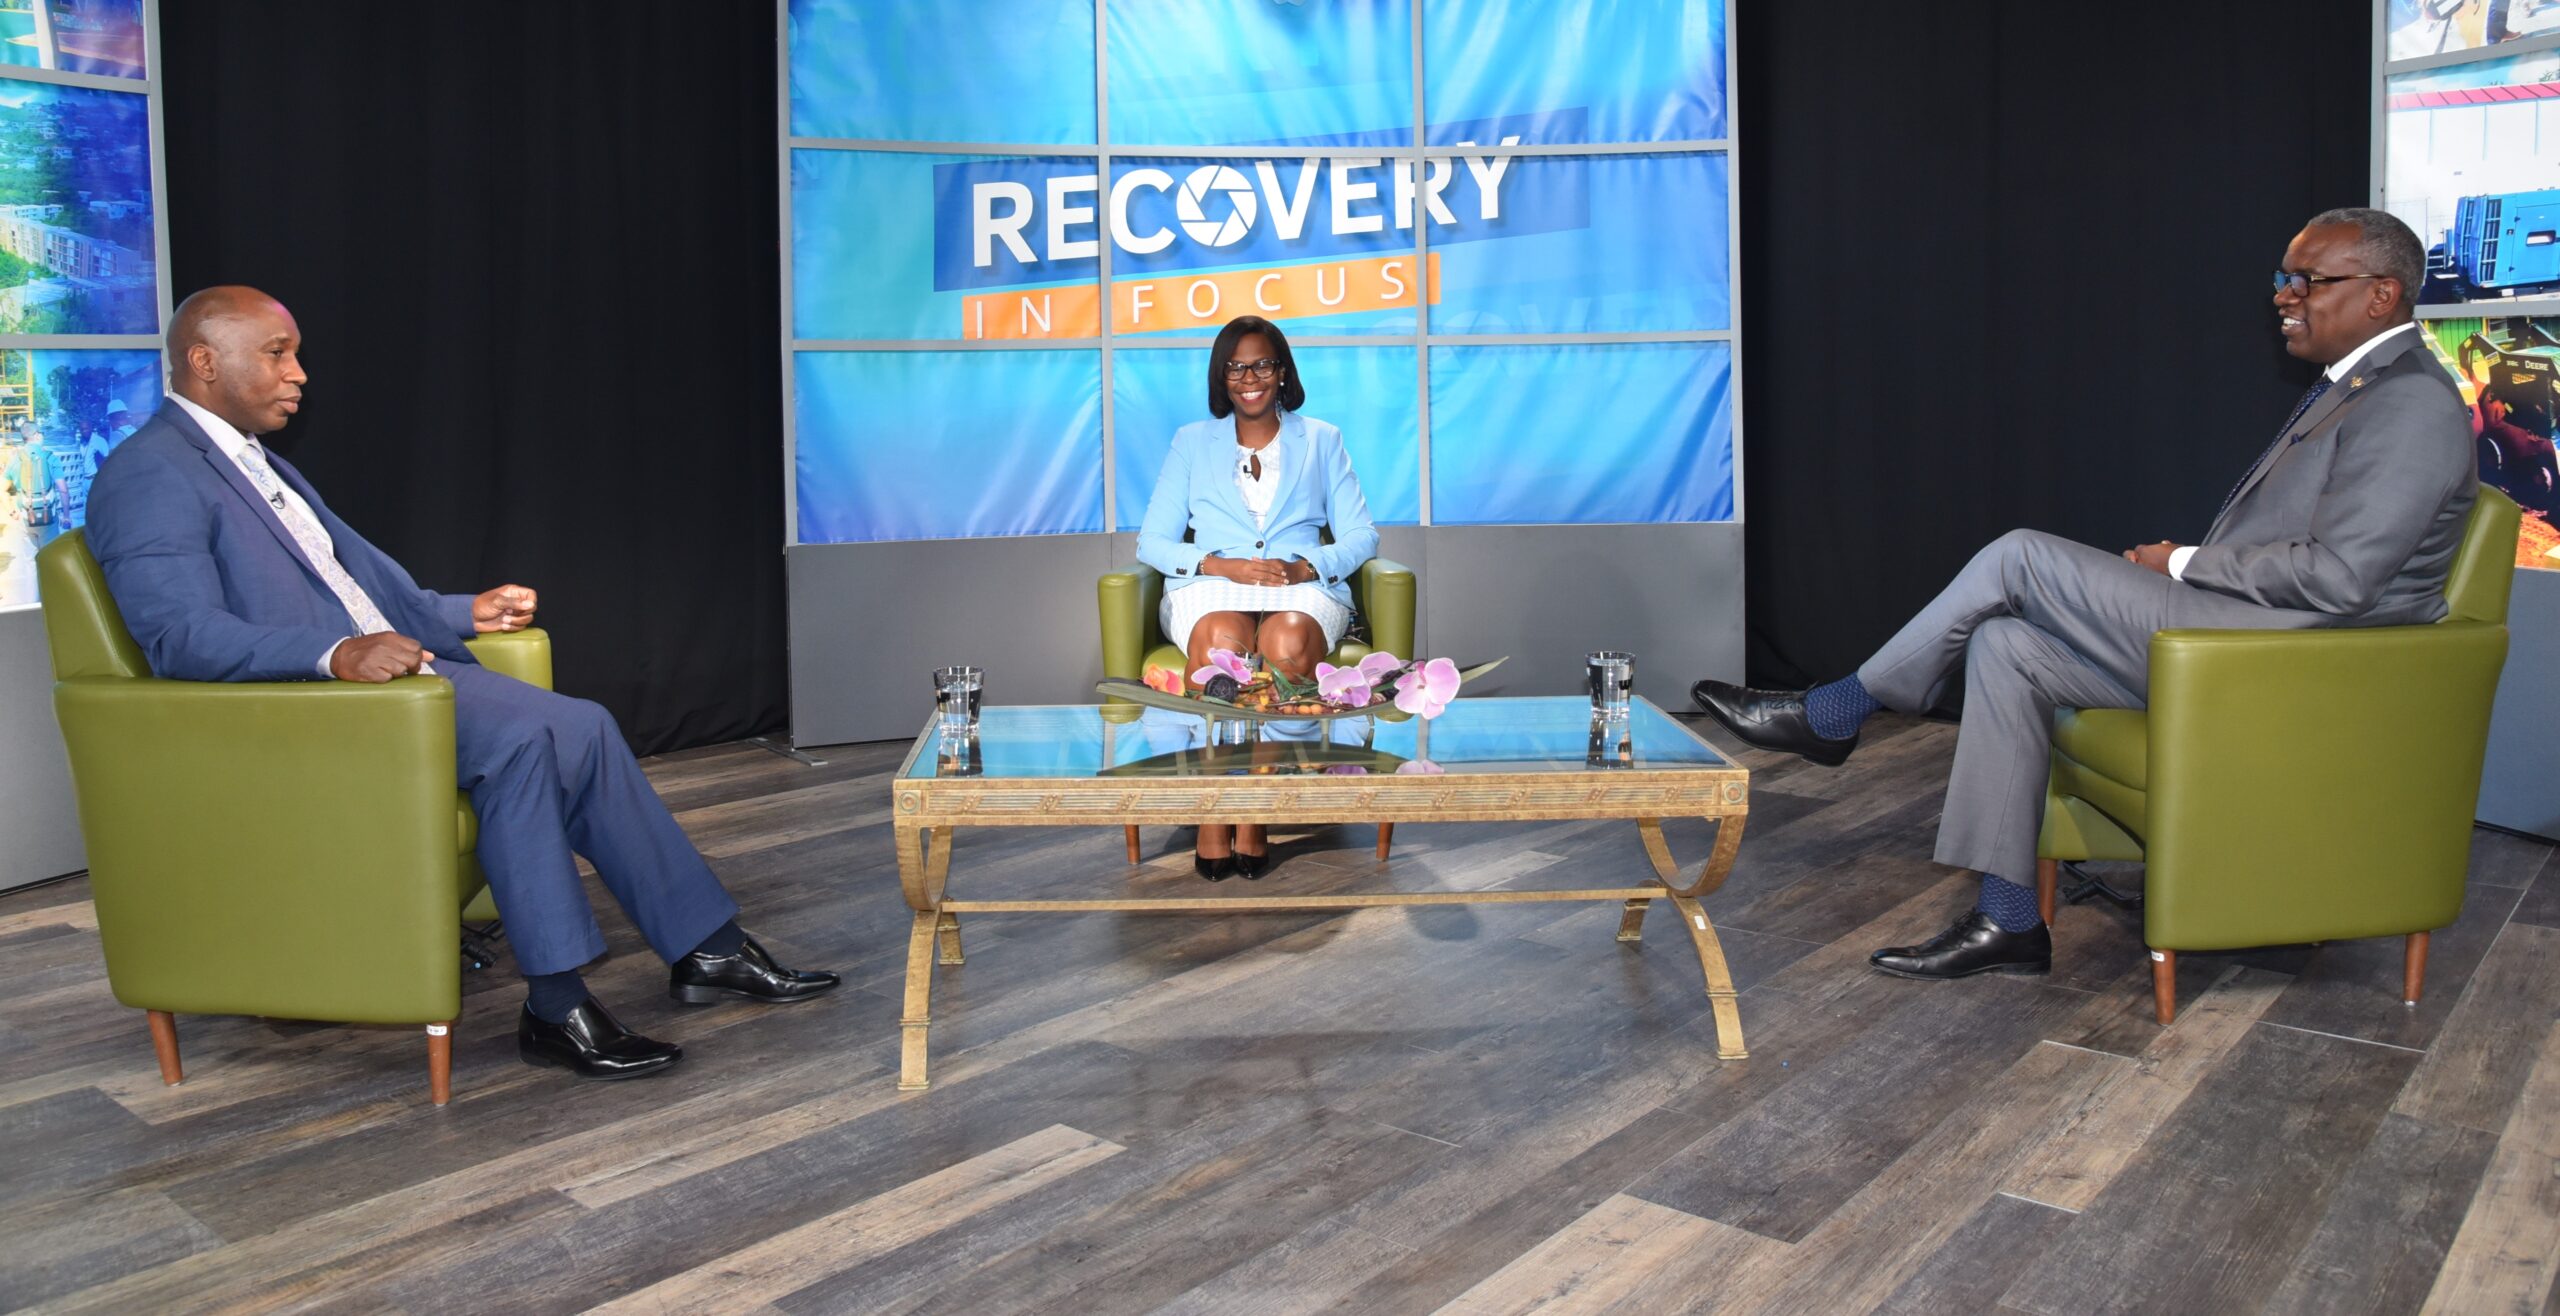 Governor Bryan to Appear on “Recovery in Focus” TV Show Tomorrow